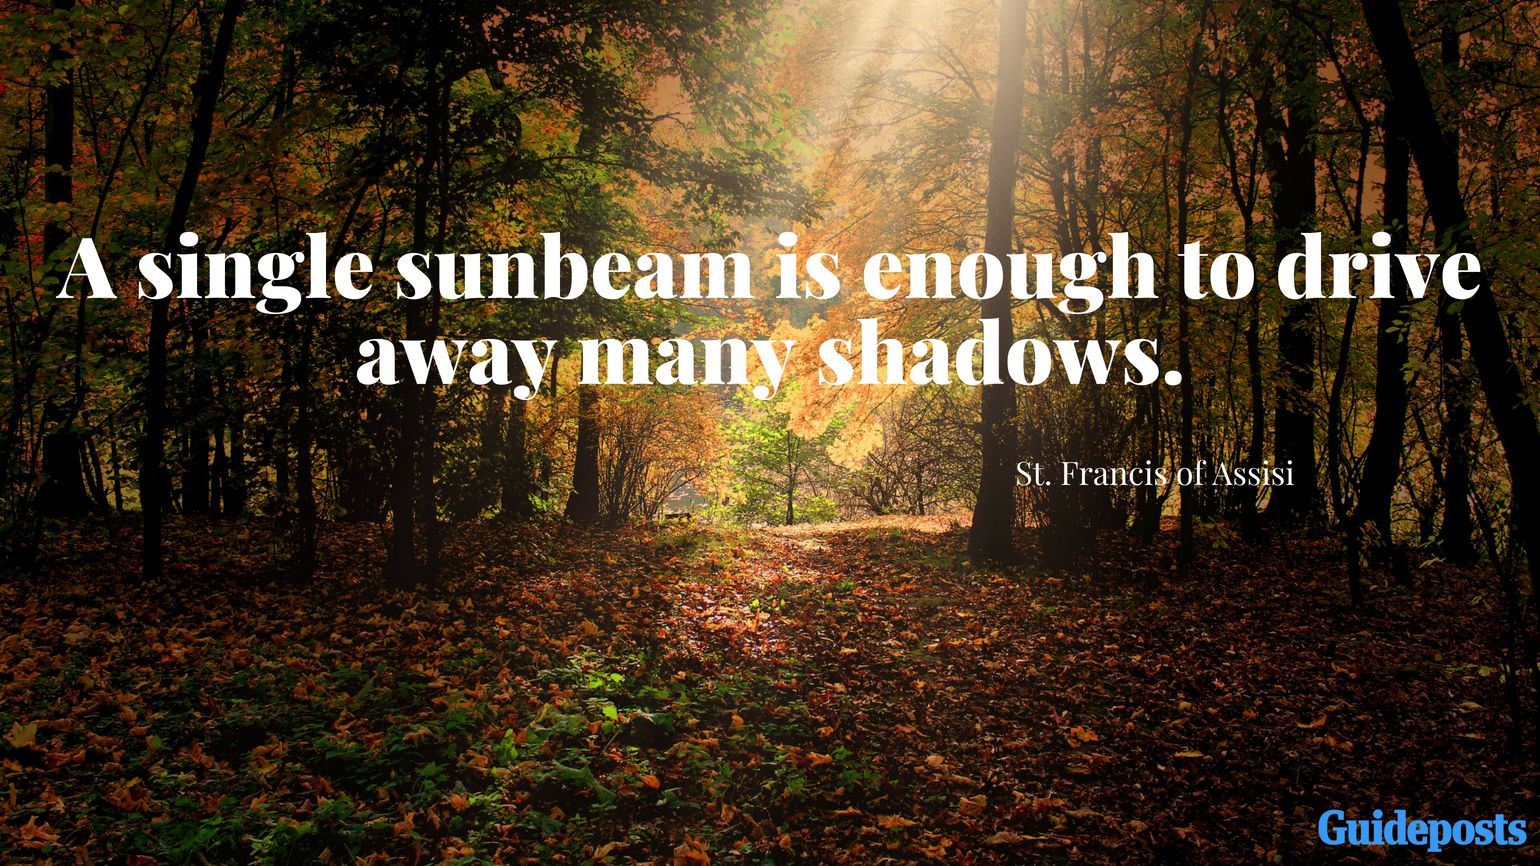 A sunbeam peeking through the forest with Saint Francis quotes